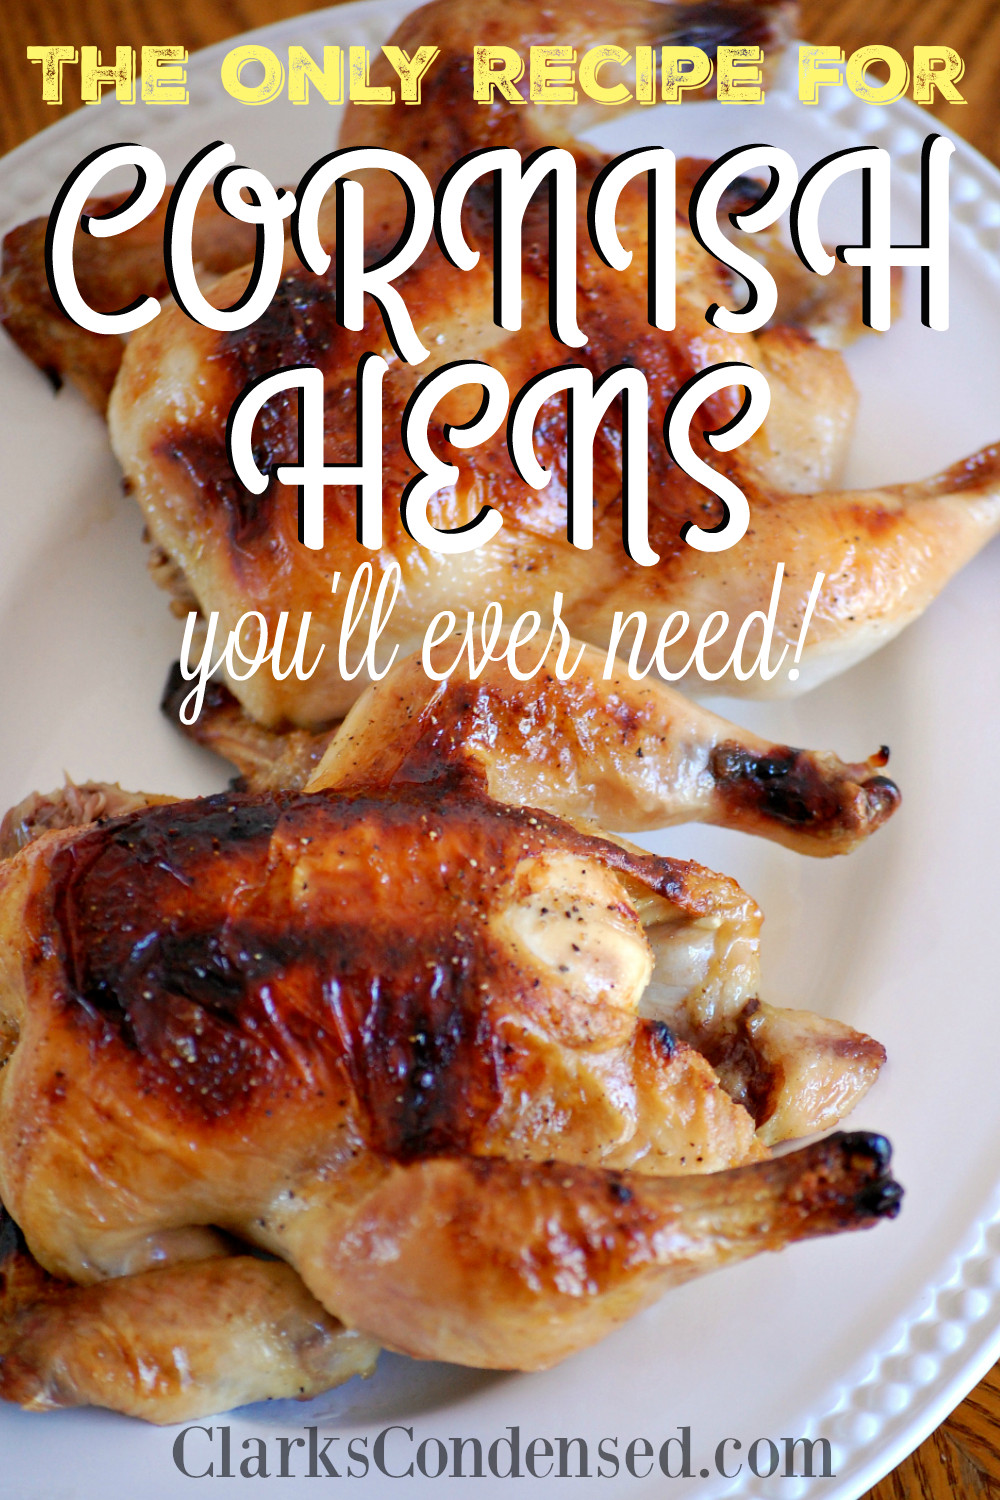 Recipes Cornish Game Hens
 The ly Recipe for Cornish Hens You Will Ever Need